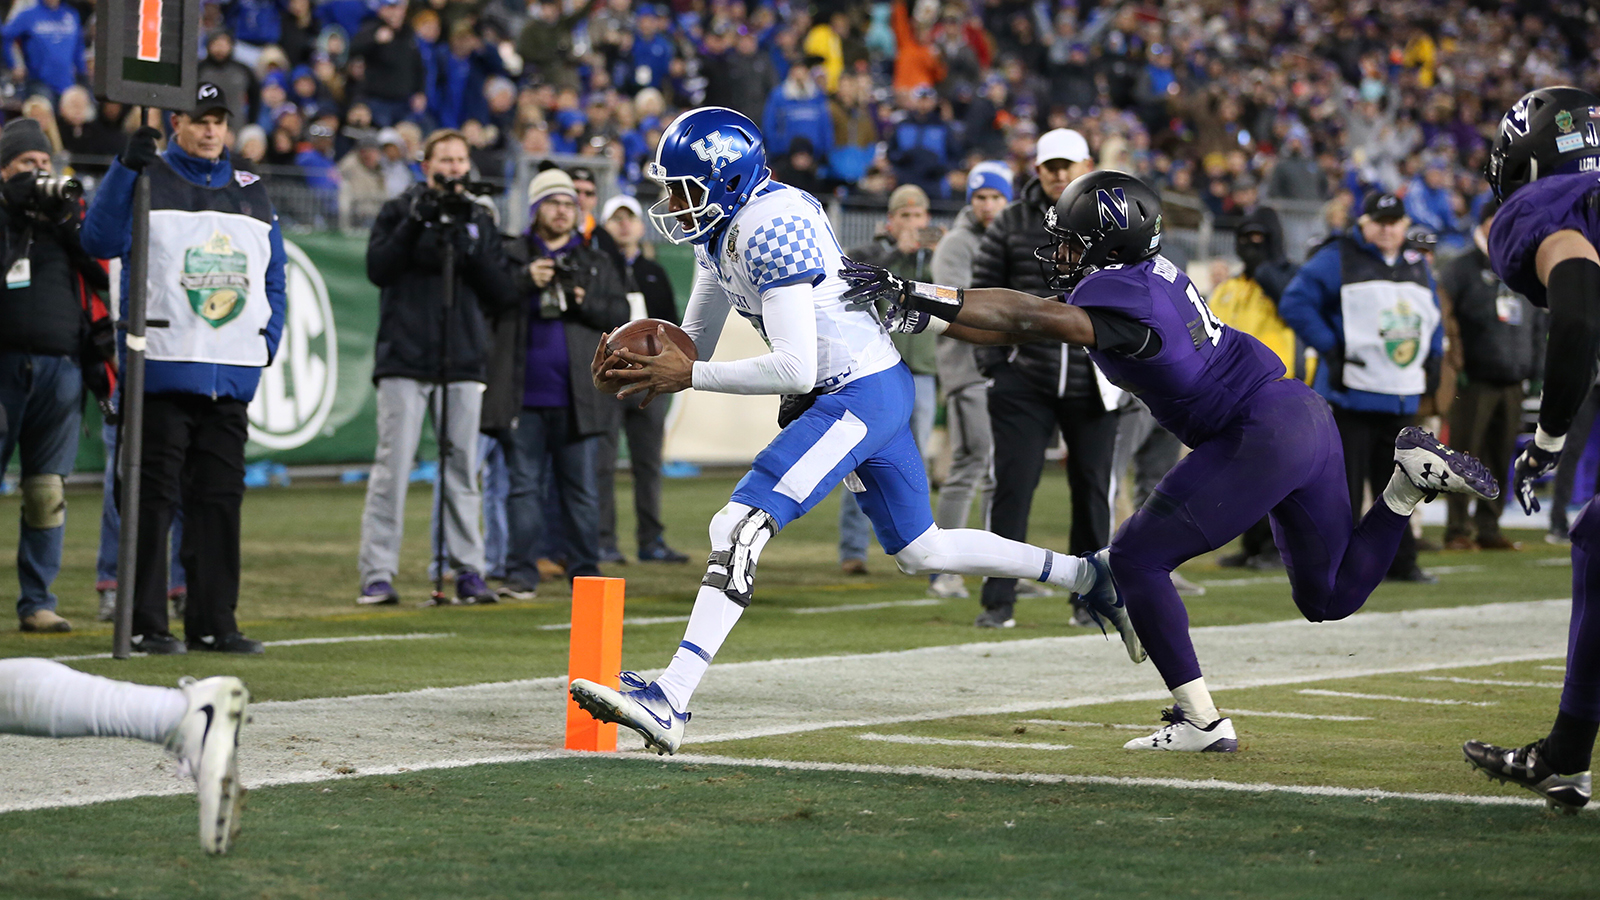 Kentucky Comes Up Just Short in Music City Bowl